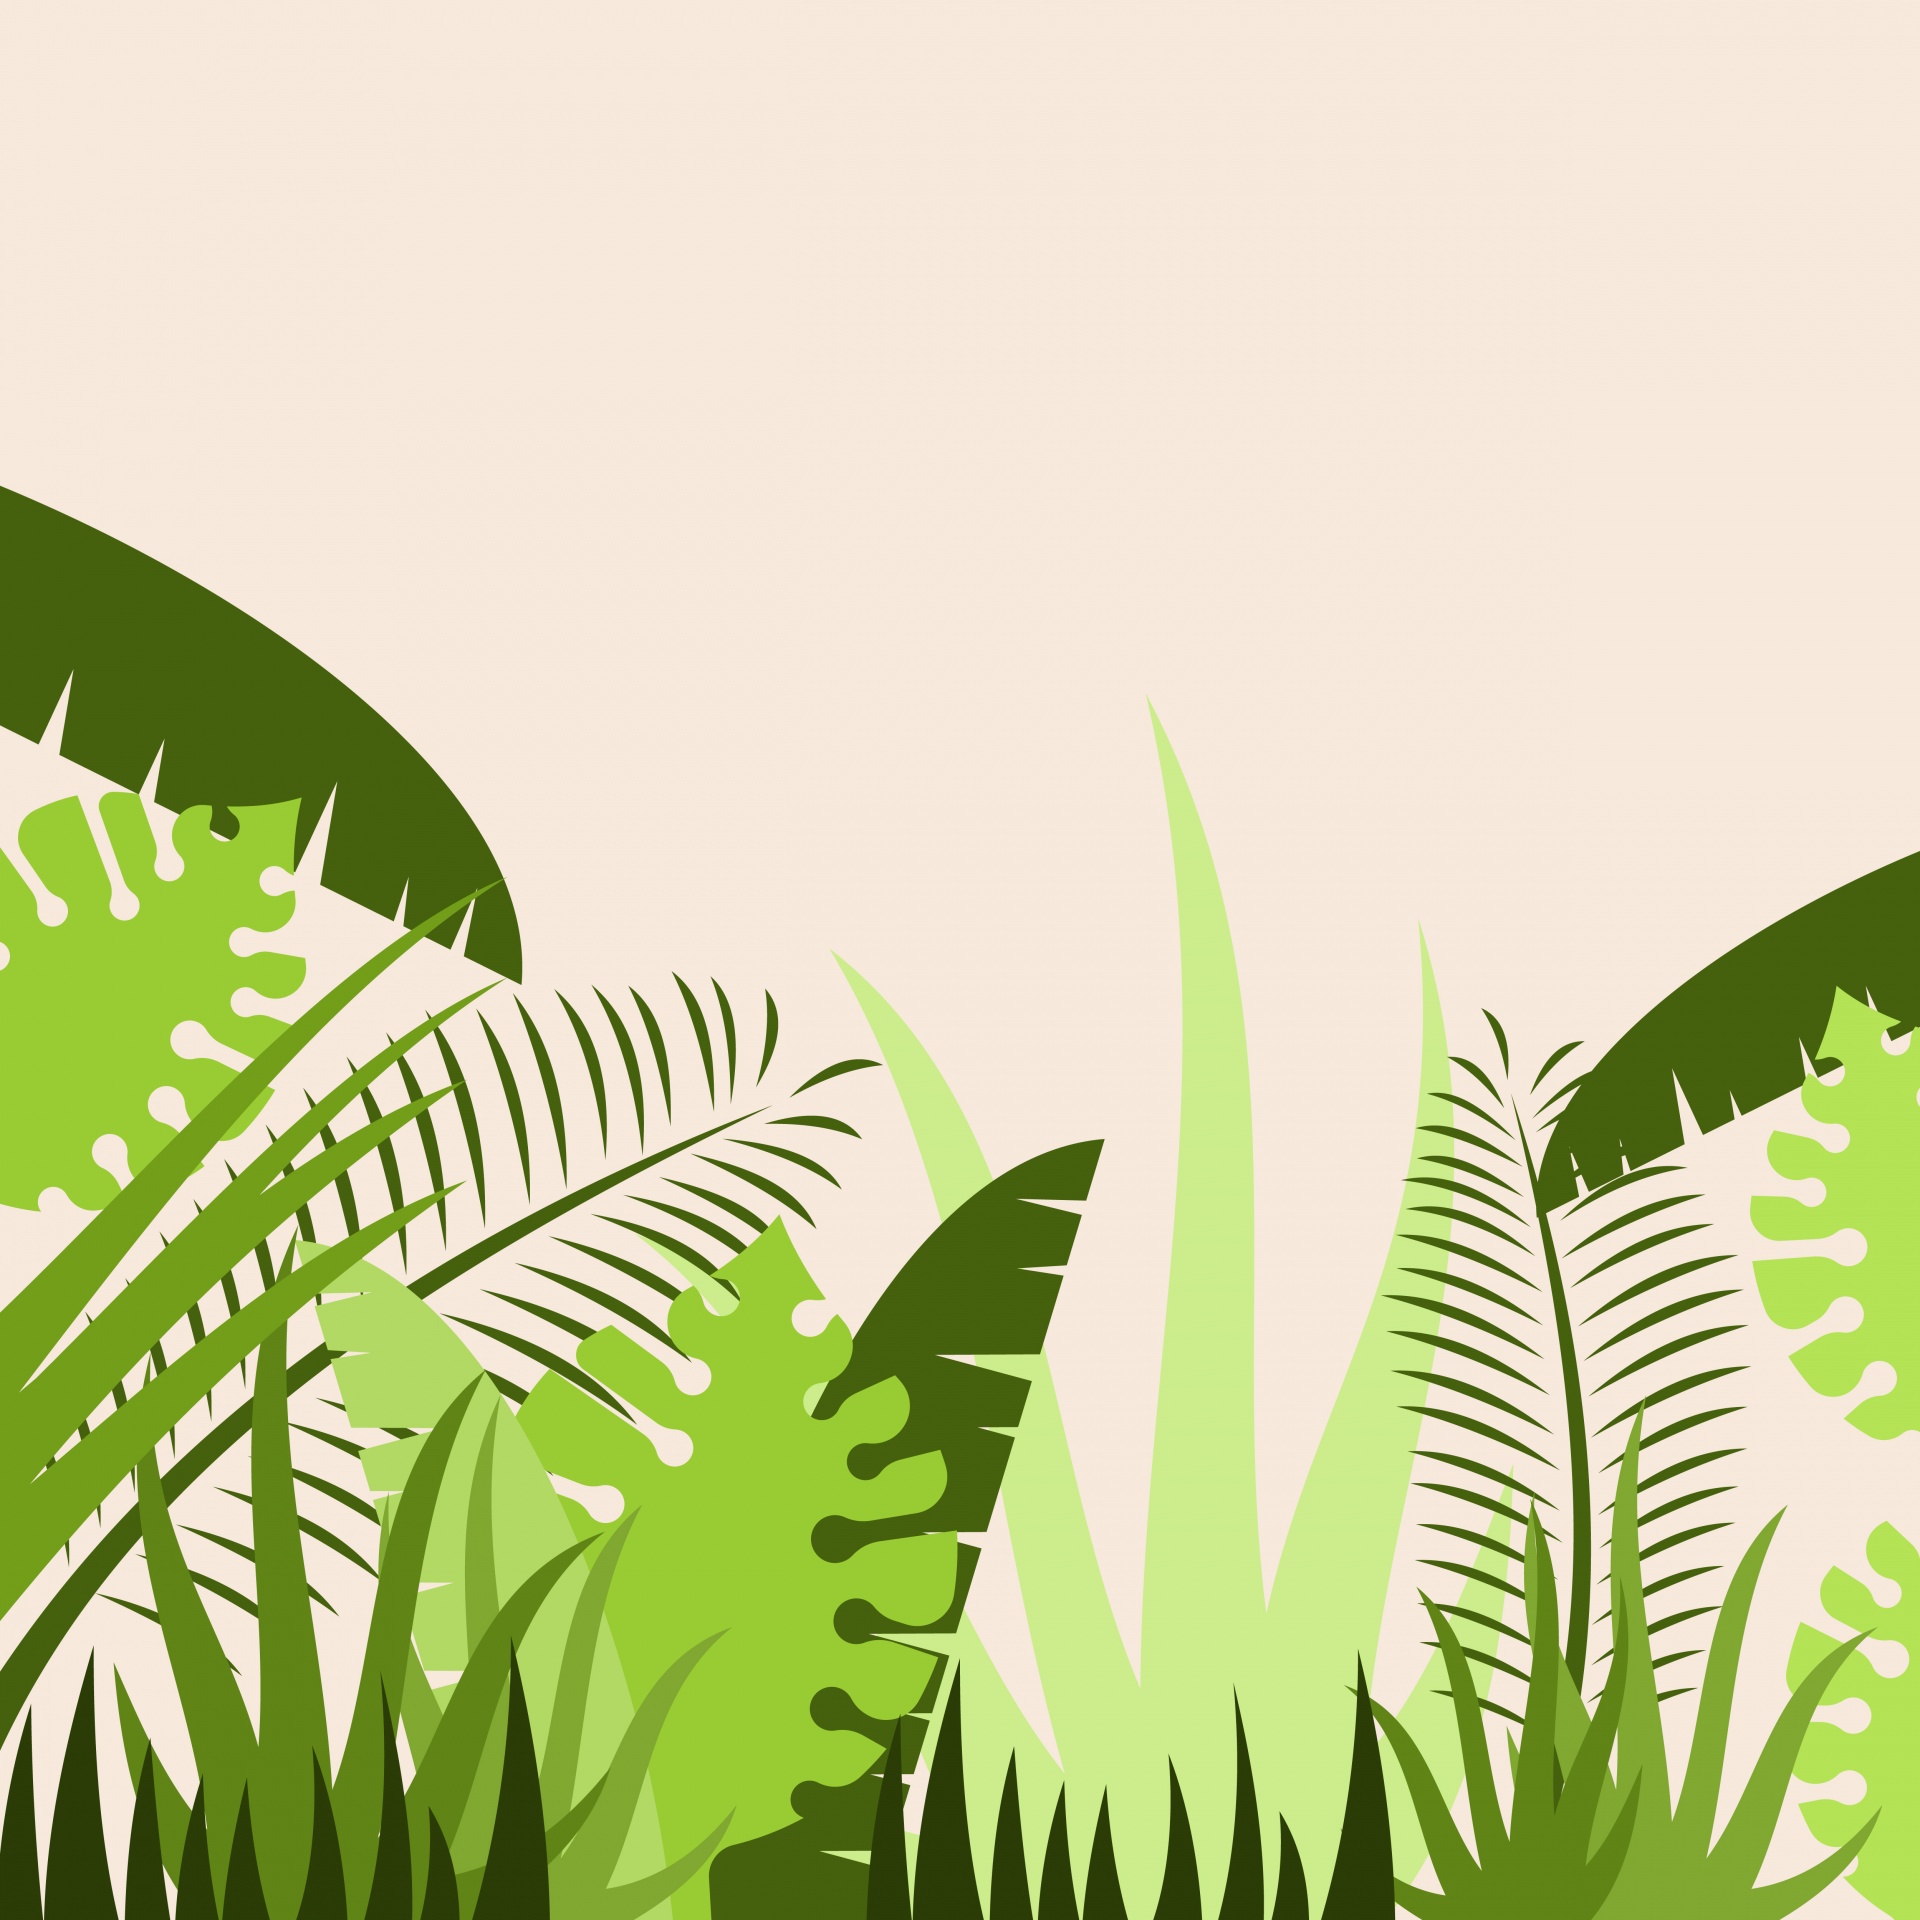 Tropical jungle leaves vector illustration backdrop in green framed on a pinkish background with copyspace, ideal for invitation cards etc